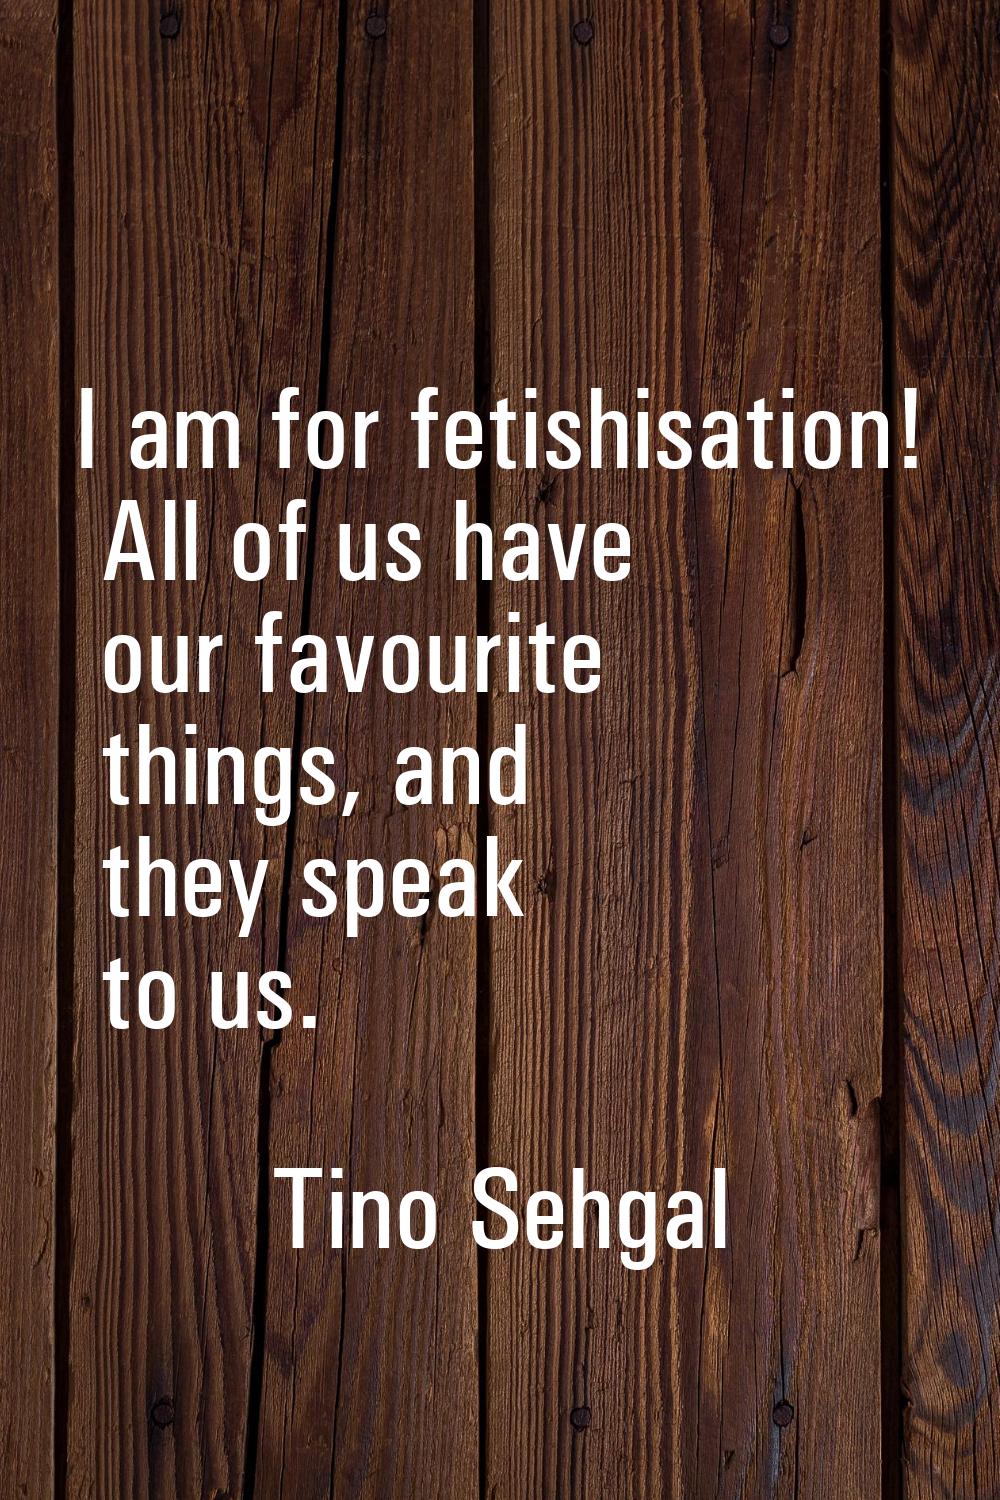 I am for fetishisation! All of us have our favourite things, and they speak to us.